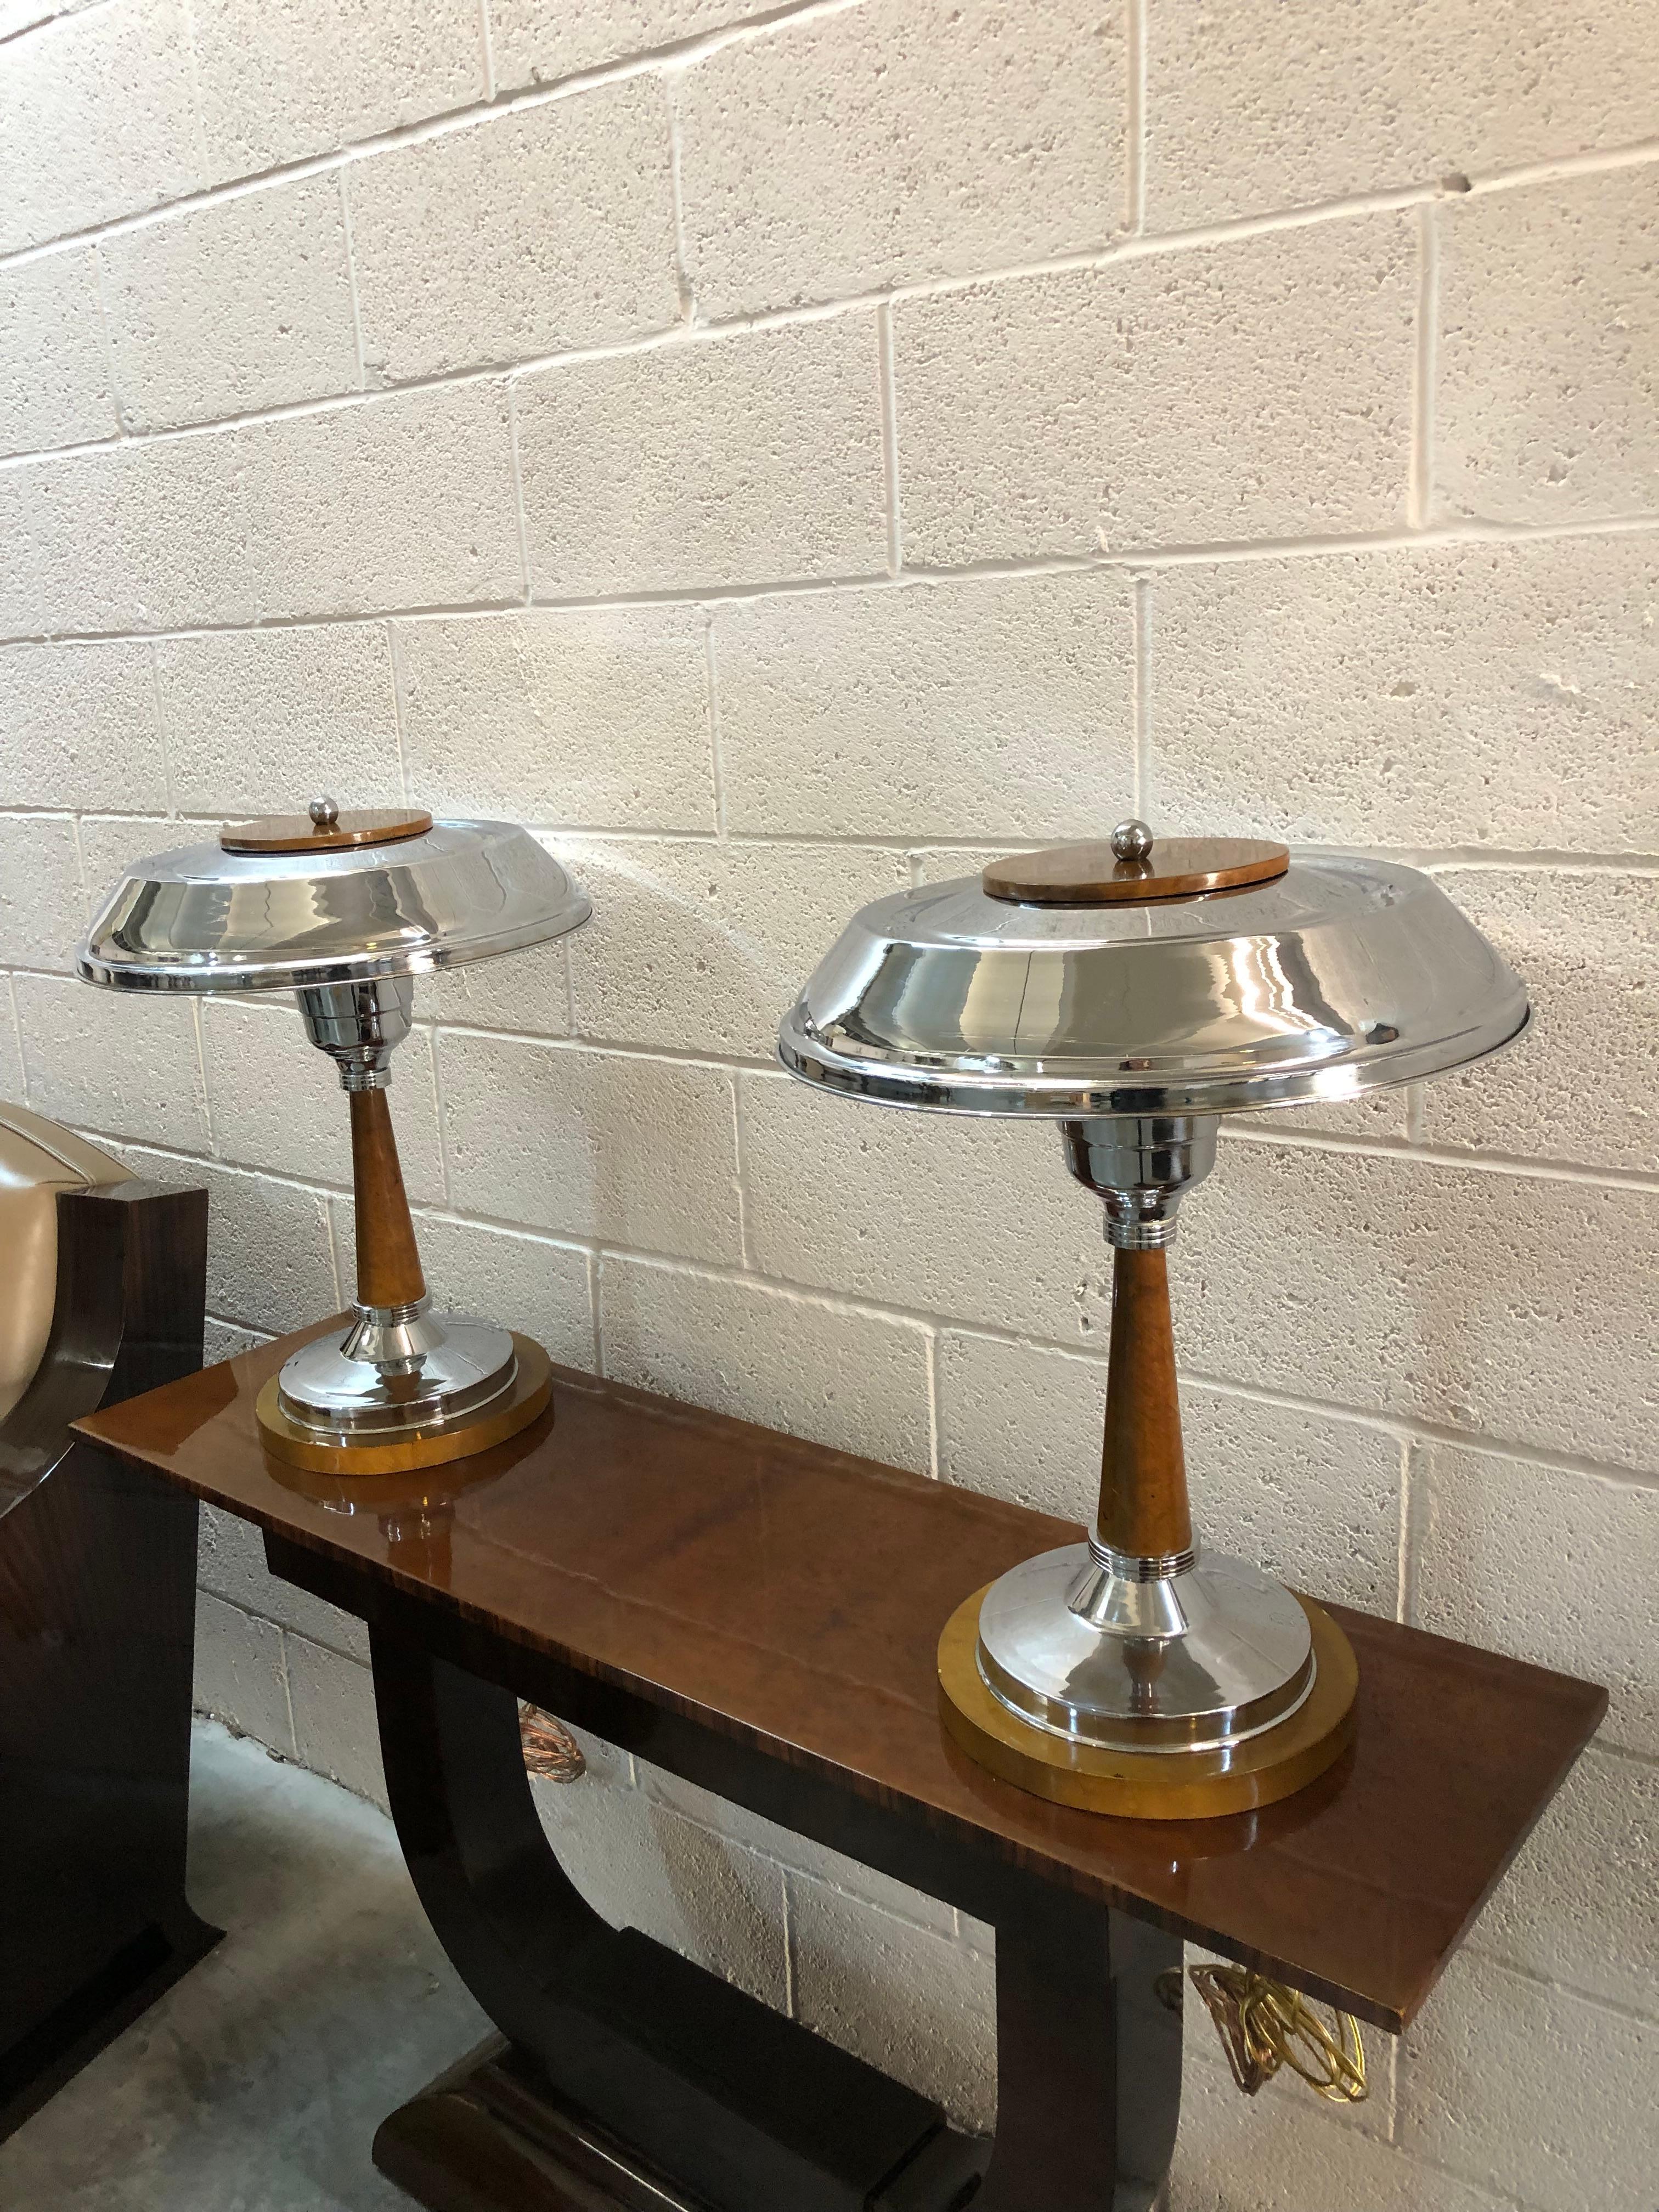 Pair of Art Deco Table Lamps in wood and chrome, 1920, France For Sale 3